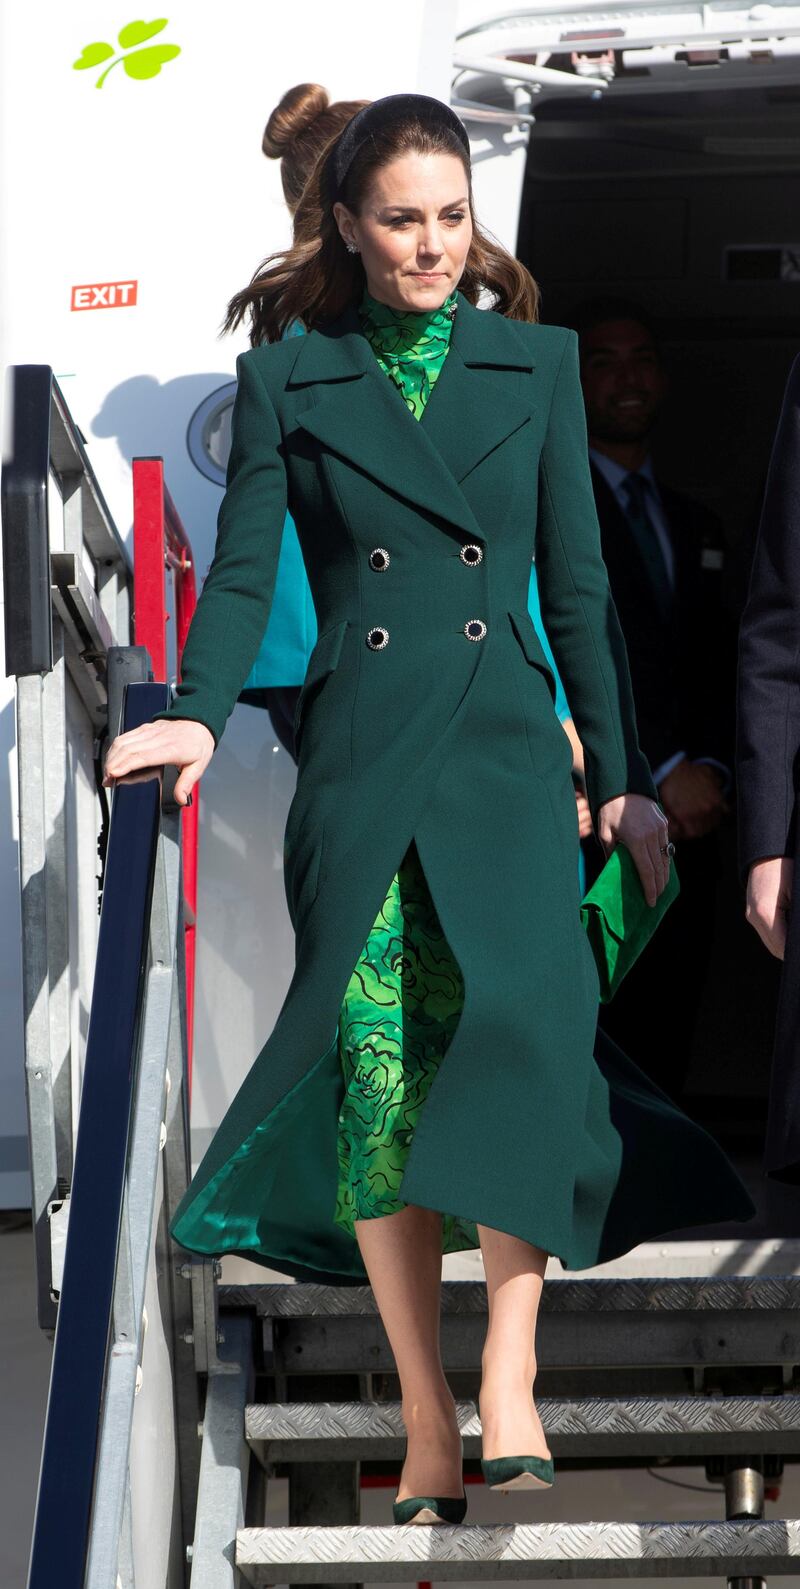 To arrive in Ireland, the duchess wore a  Catherine Walker coat over a dress by Alessandra Rich. Reuters